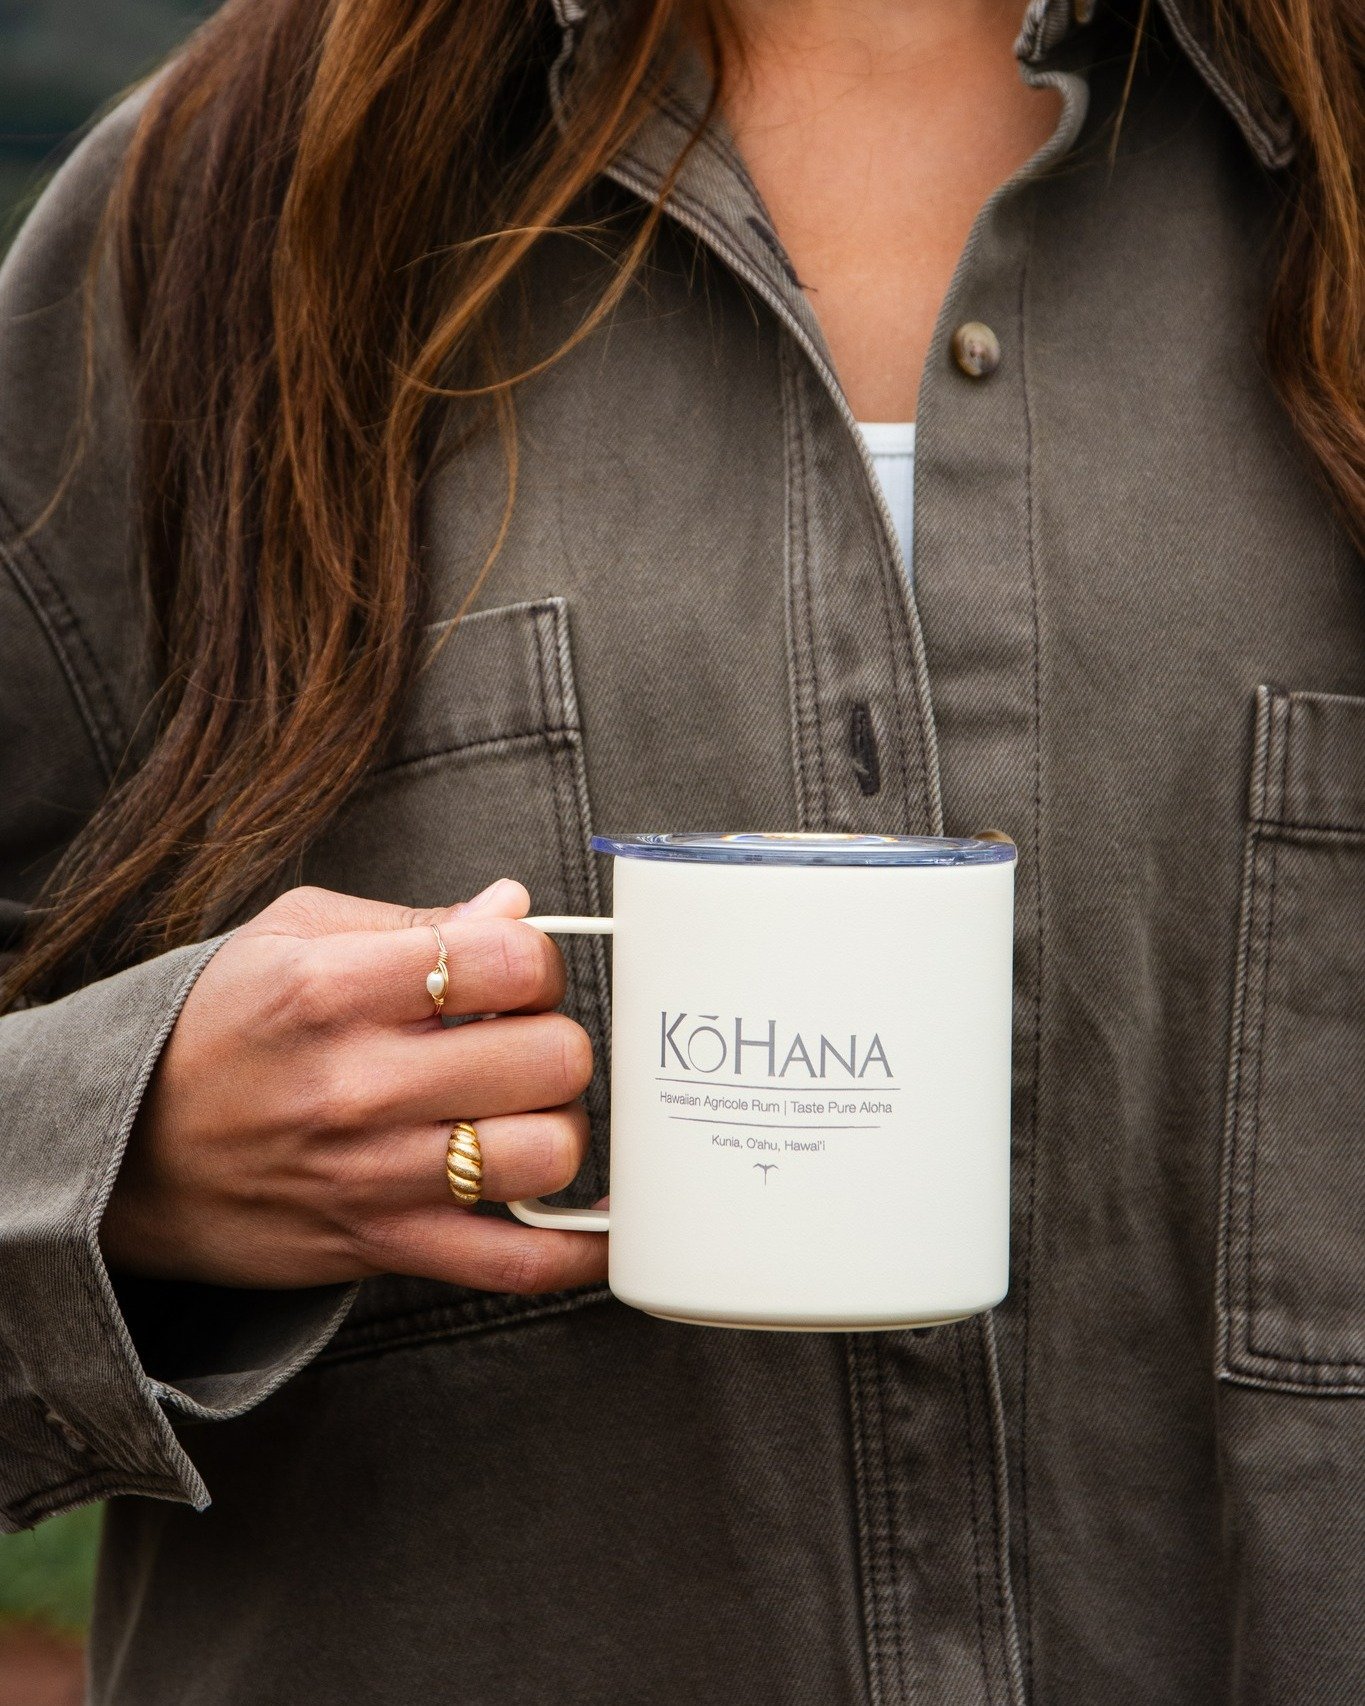 Introducing the newest addition to the Kō Hana Merch lineup: our versatile insulated @miir camp cup! Whether you're sipping on your morning brew or sneaking in a little rum, this cup has got you covered. Get yours today on our website or direct from